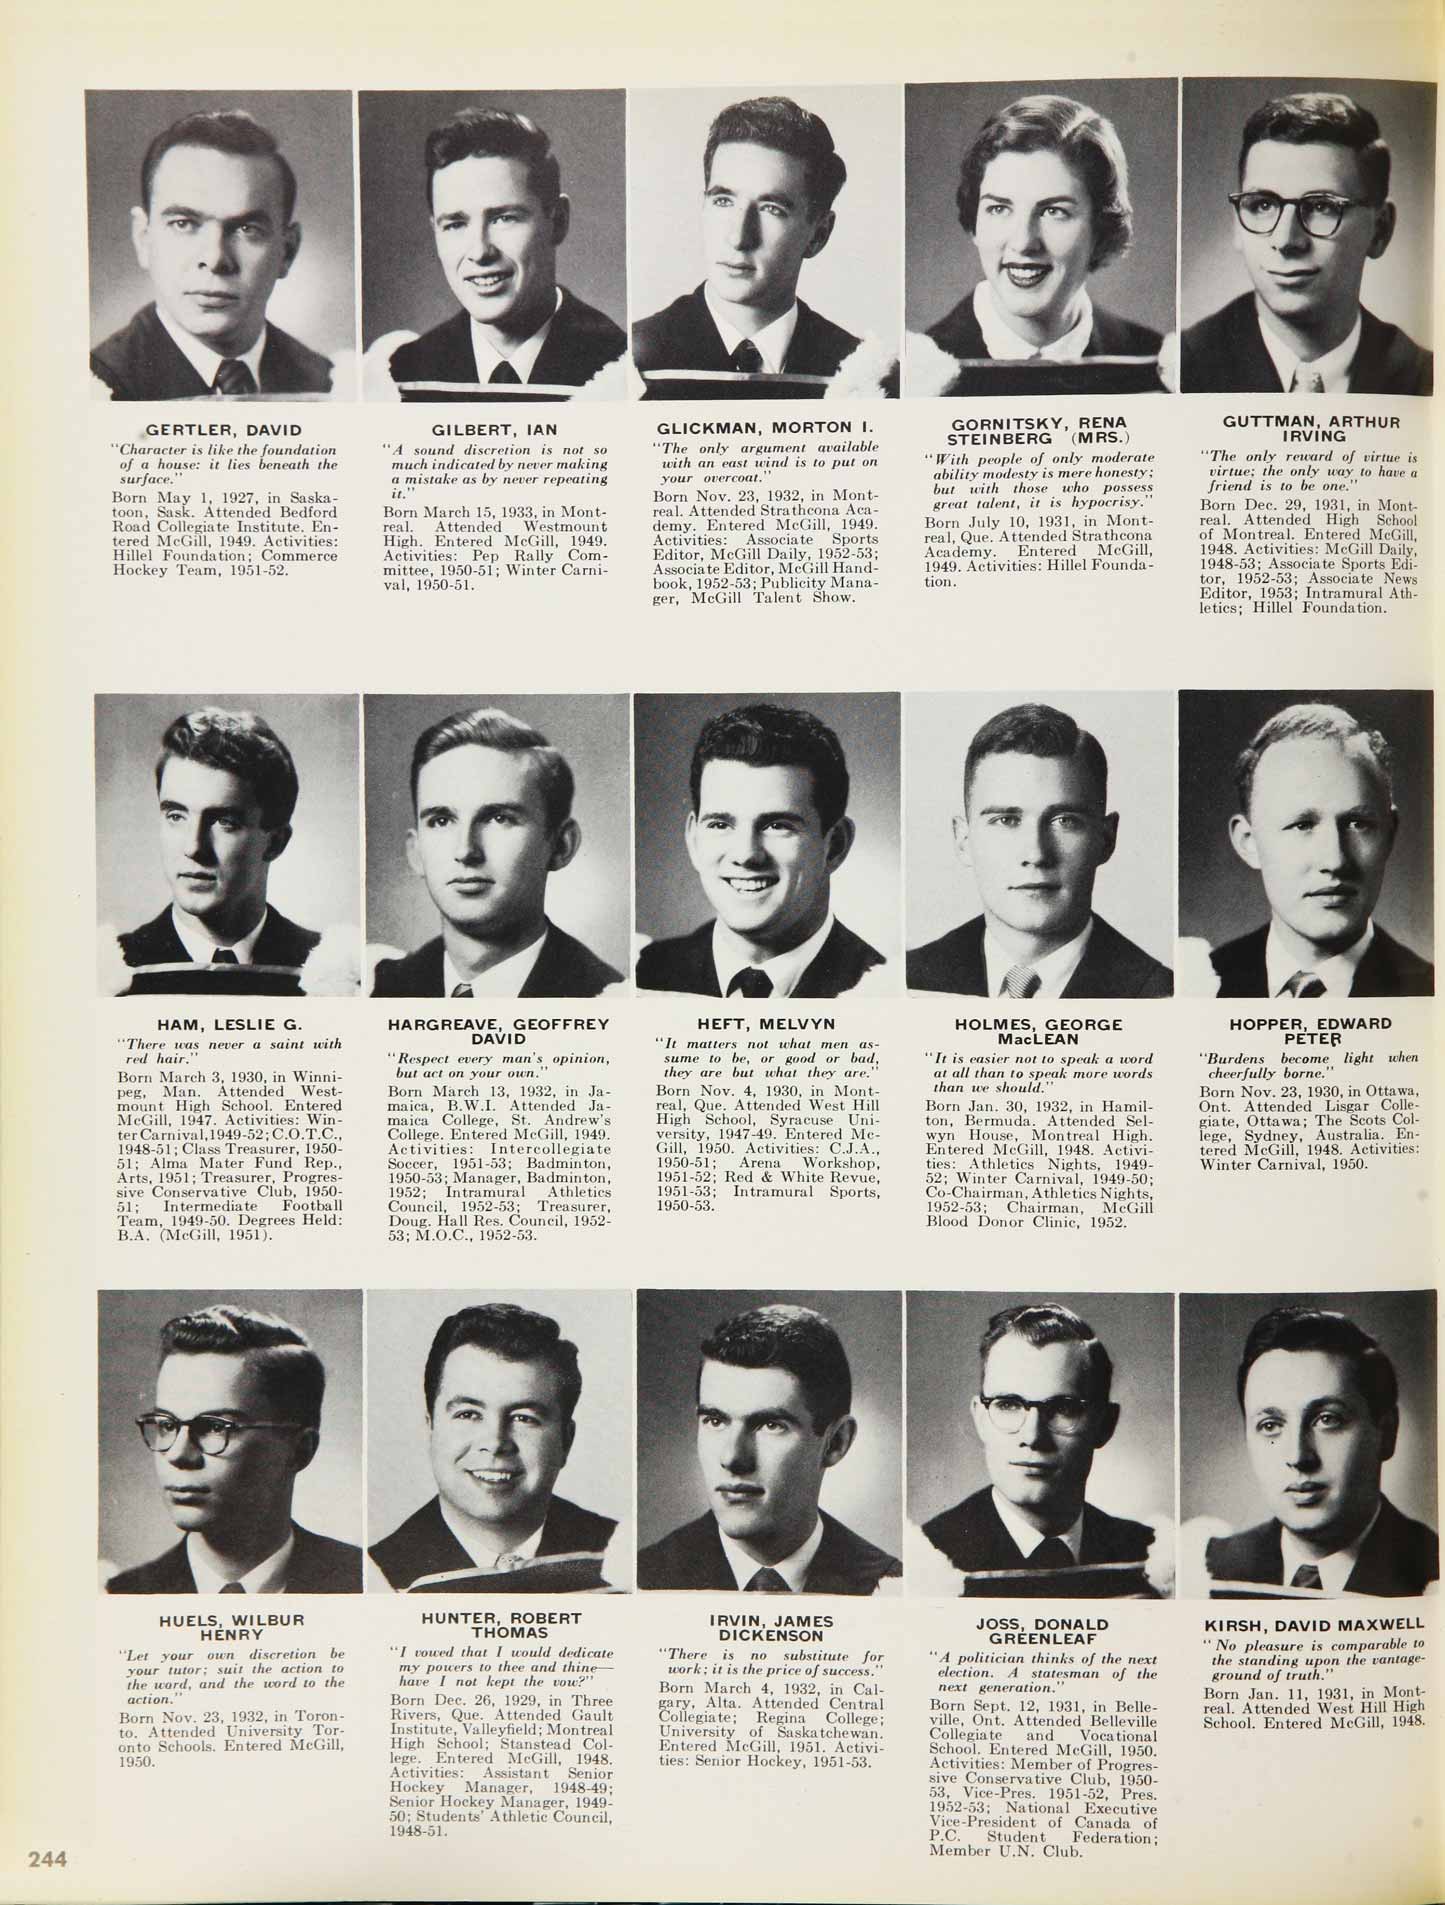 McGill Yearbook: 1953